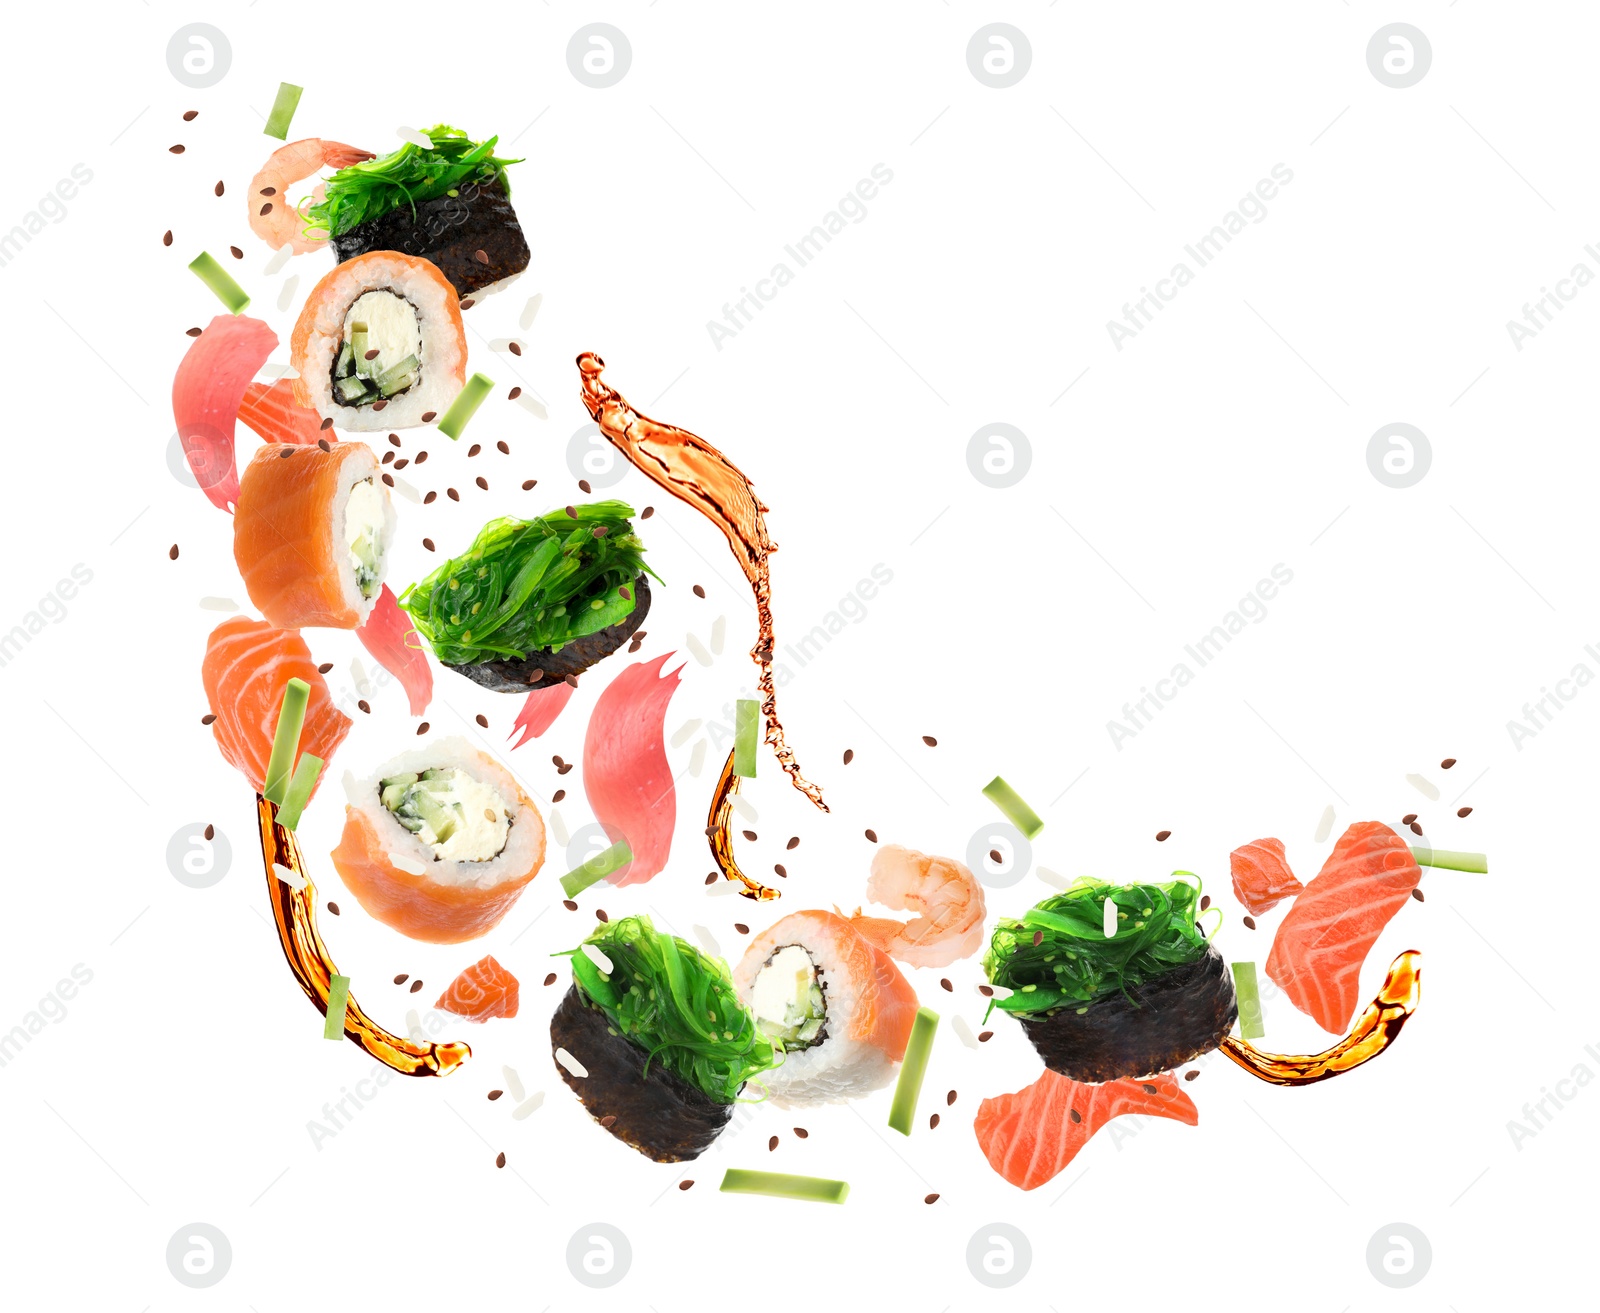 Image of Different sushi rolls and ingredients on white background